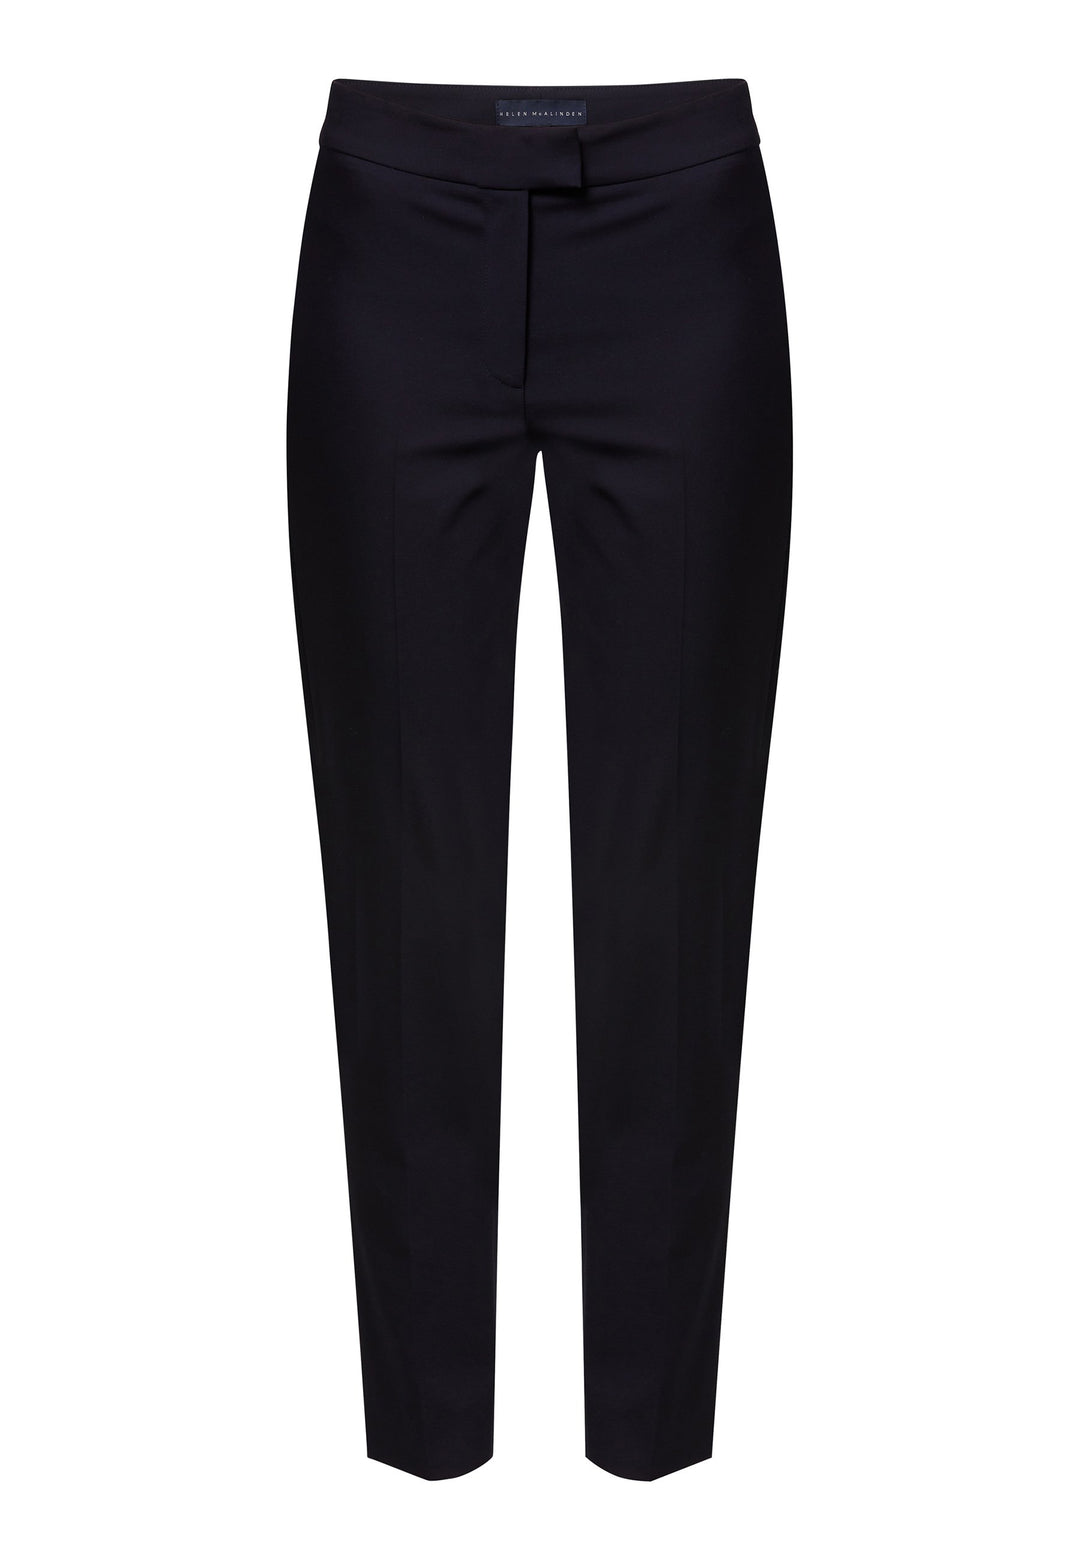 Investment-worthy, neat narrow-leg trouser with a hint of stretch. A wardrobe staple and HMcA classic. This fabric is made with a hint of elastane to ensure comfort and ease of movement. Shown here in a sophisticated dark navy. Pair with a simple tee for workwear appeal or elevate your look with the coordinating blazer.